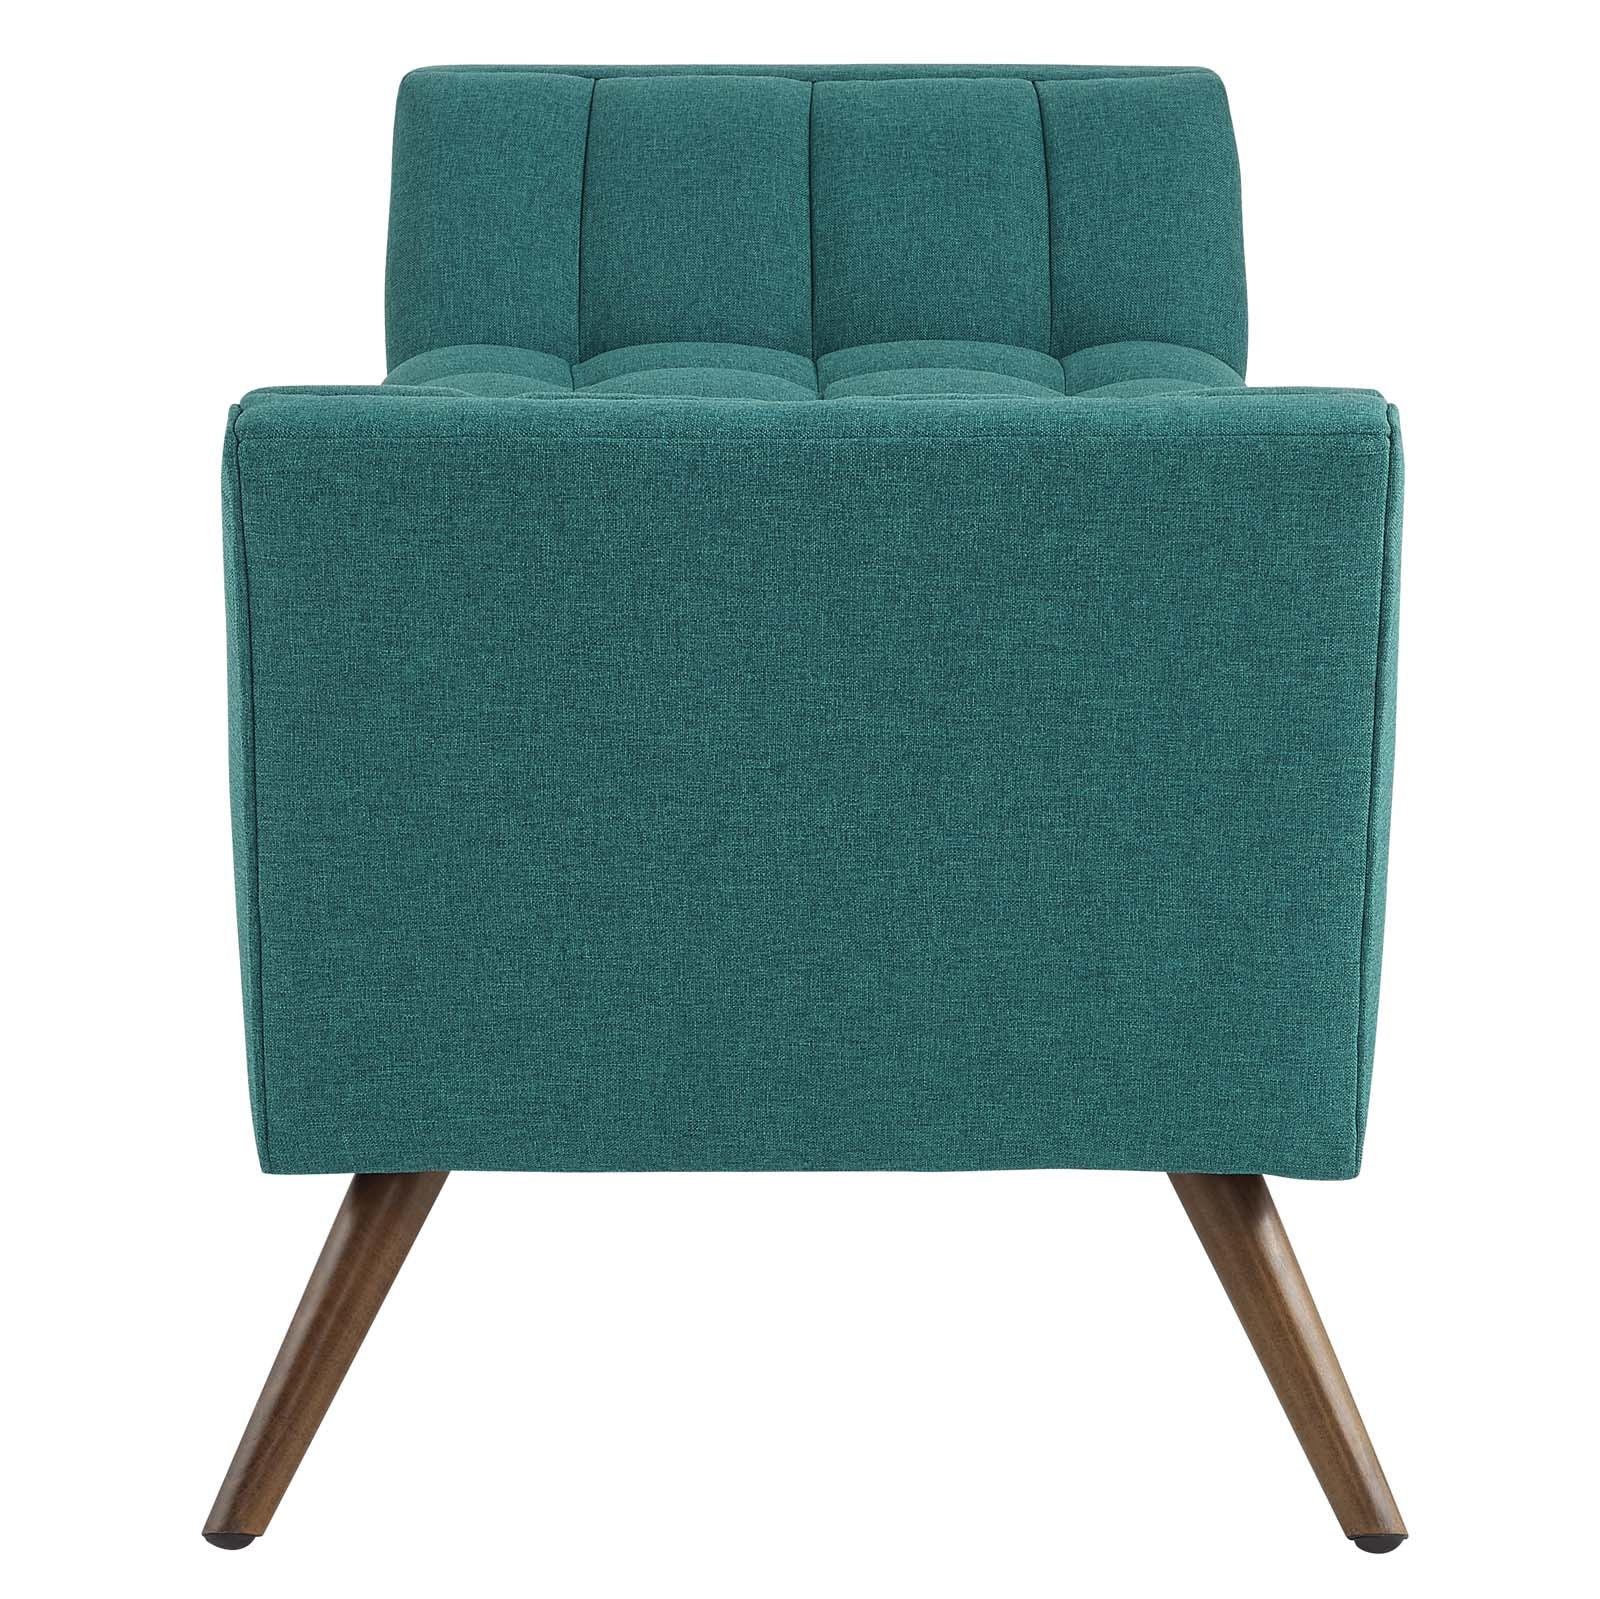 Modway Benches - Response Medium Upholstered Fabric Bench Teal